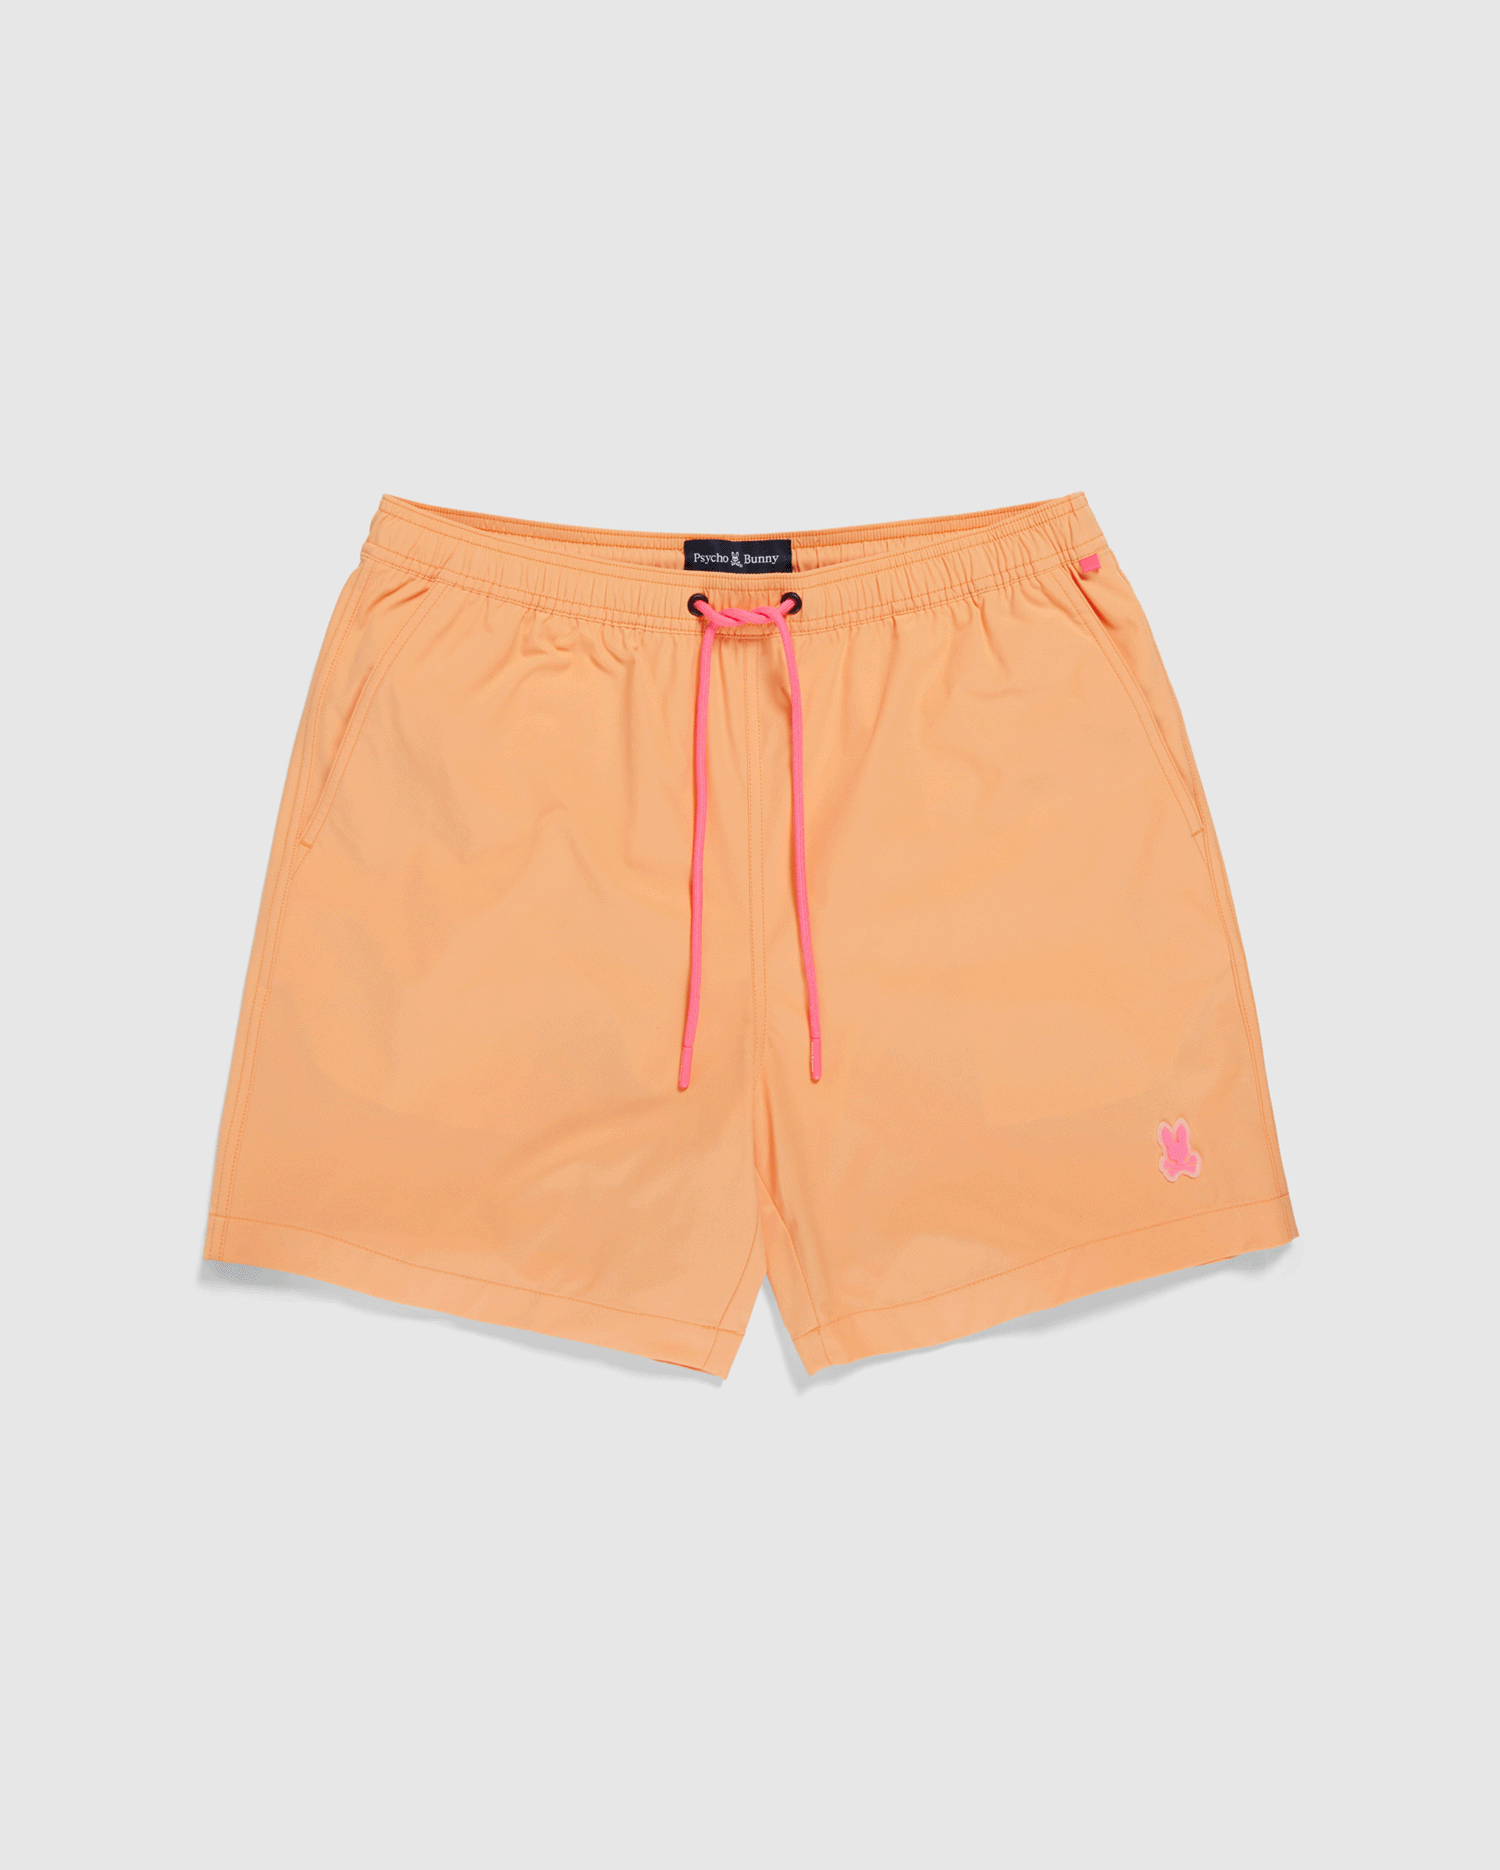 Bright orange Psycho Bunny swim trunks with a pink drawstring and a small pink logo on the lower left leg, displayed against a plain white background.